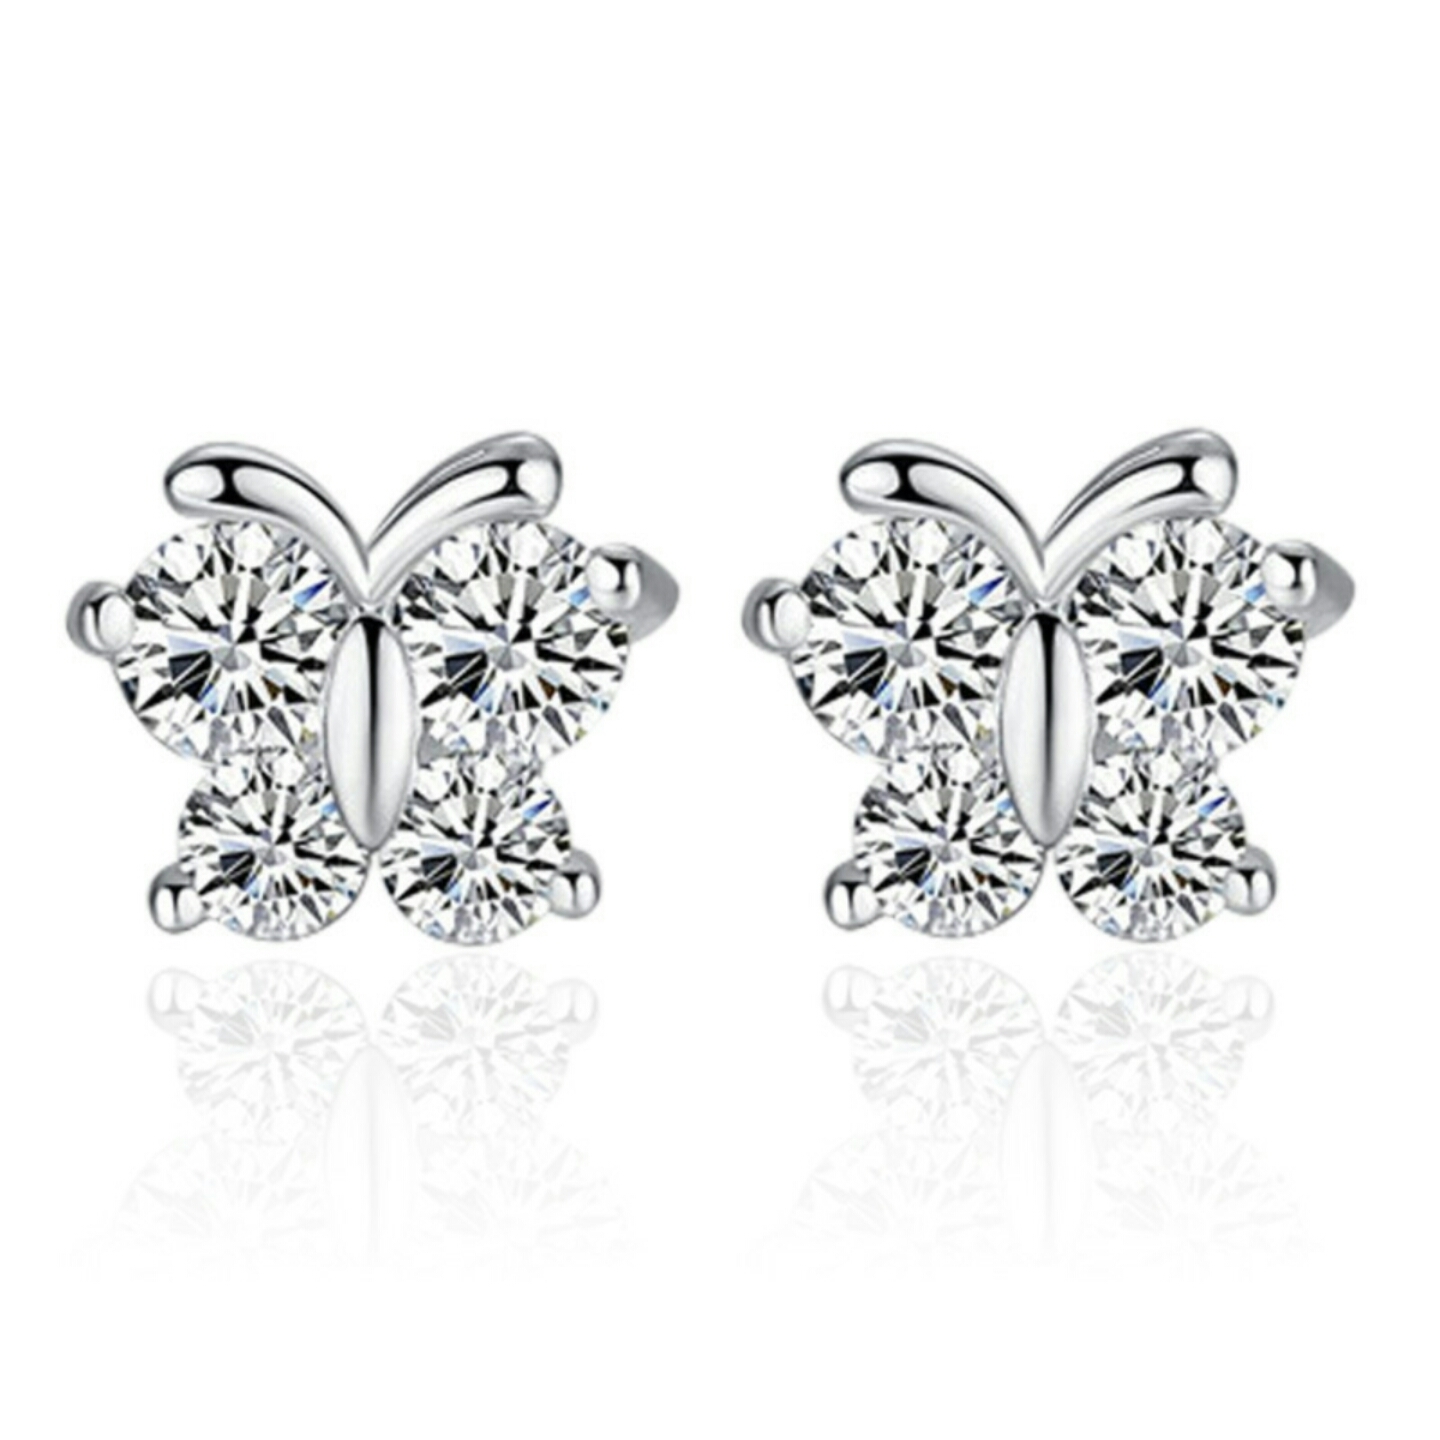 925 sterling silver Butterfly earrings with CZ stones